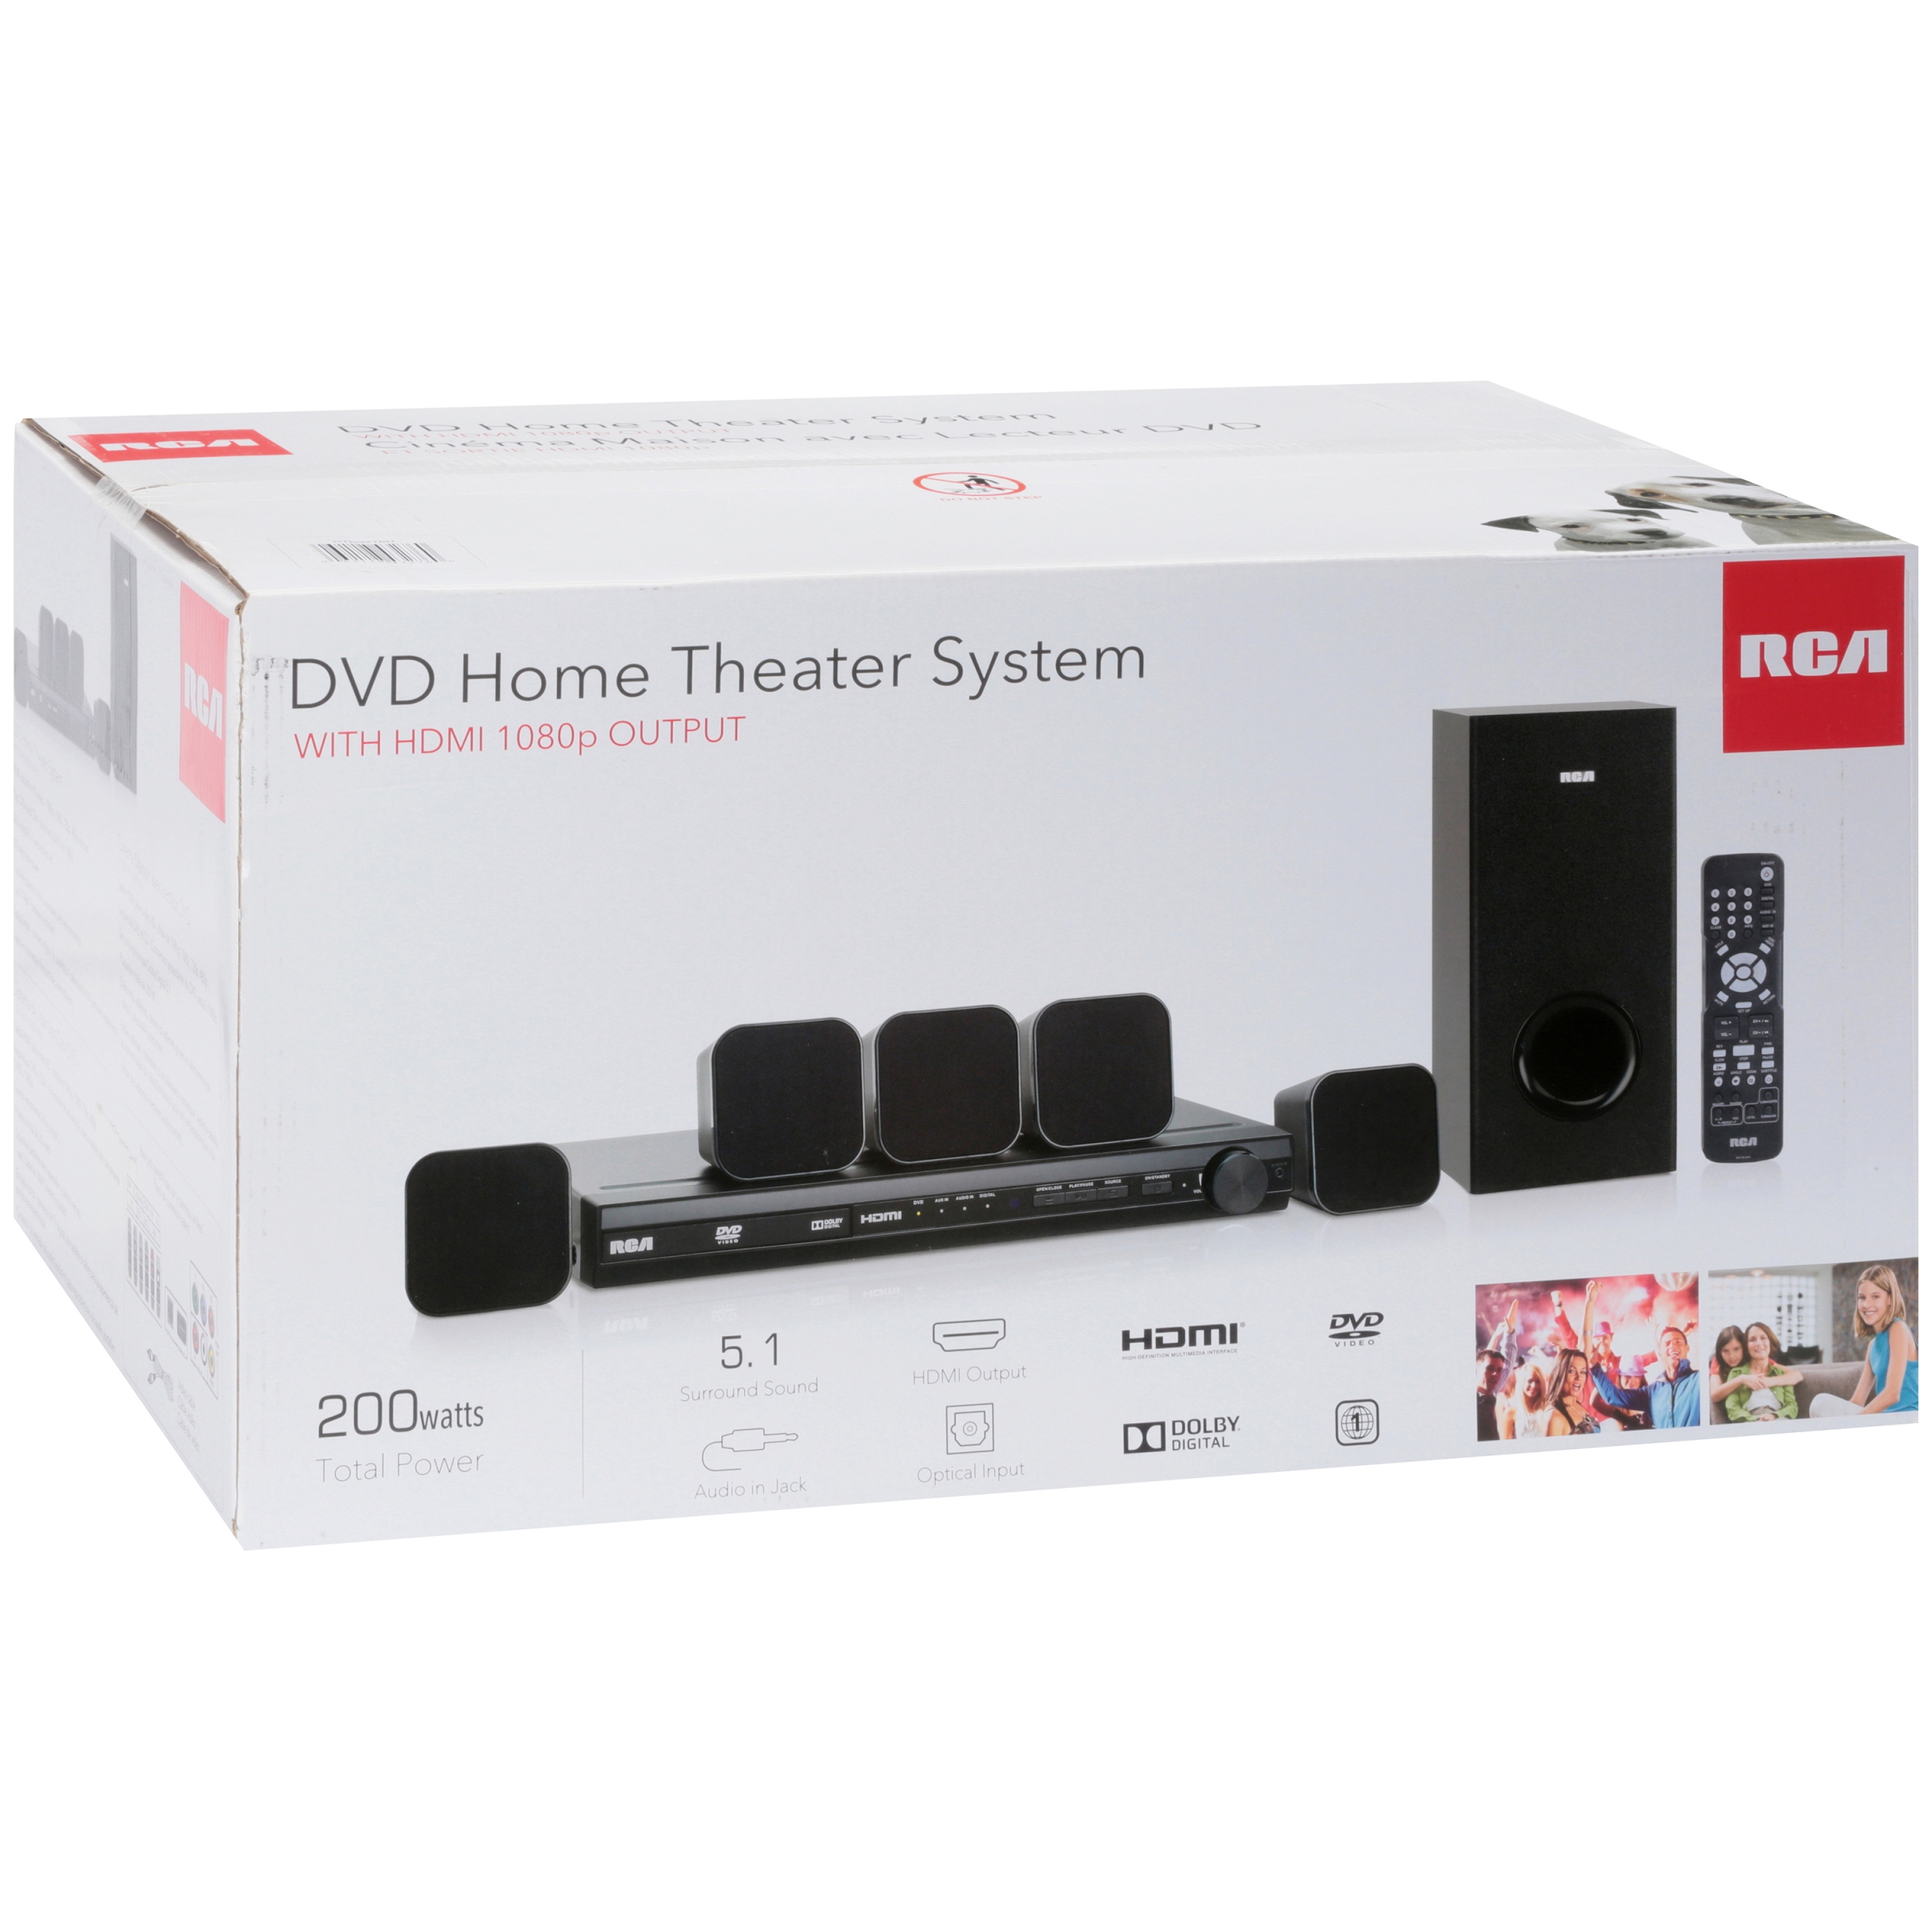 RCA DVD Home Theater System with HDMI 1080p Output 8 pc Box - image 5 of 10